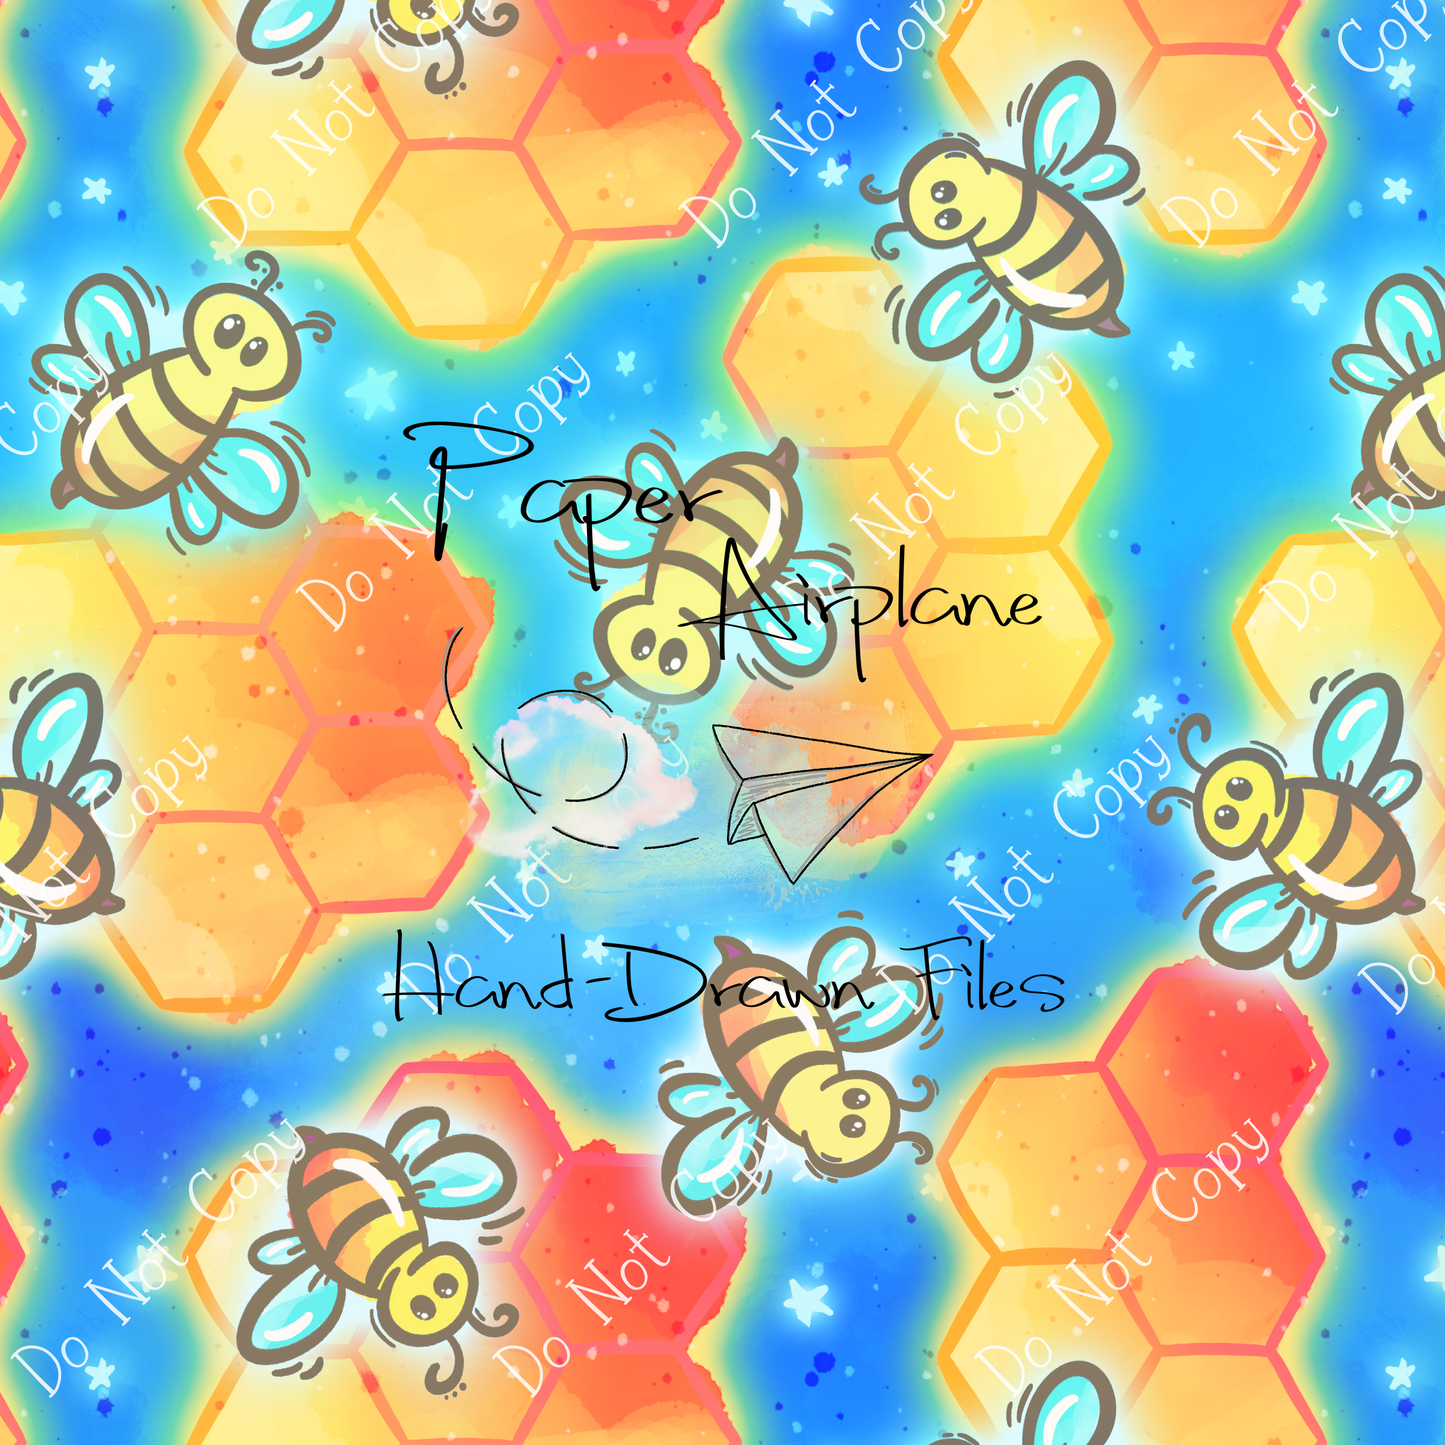 Glow Bees (Blue)